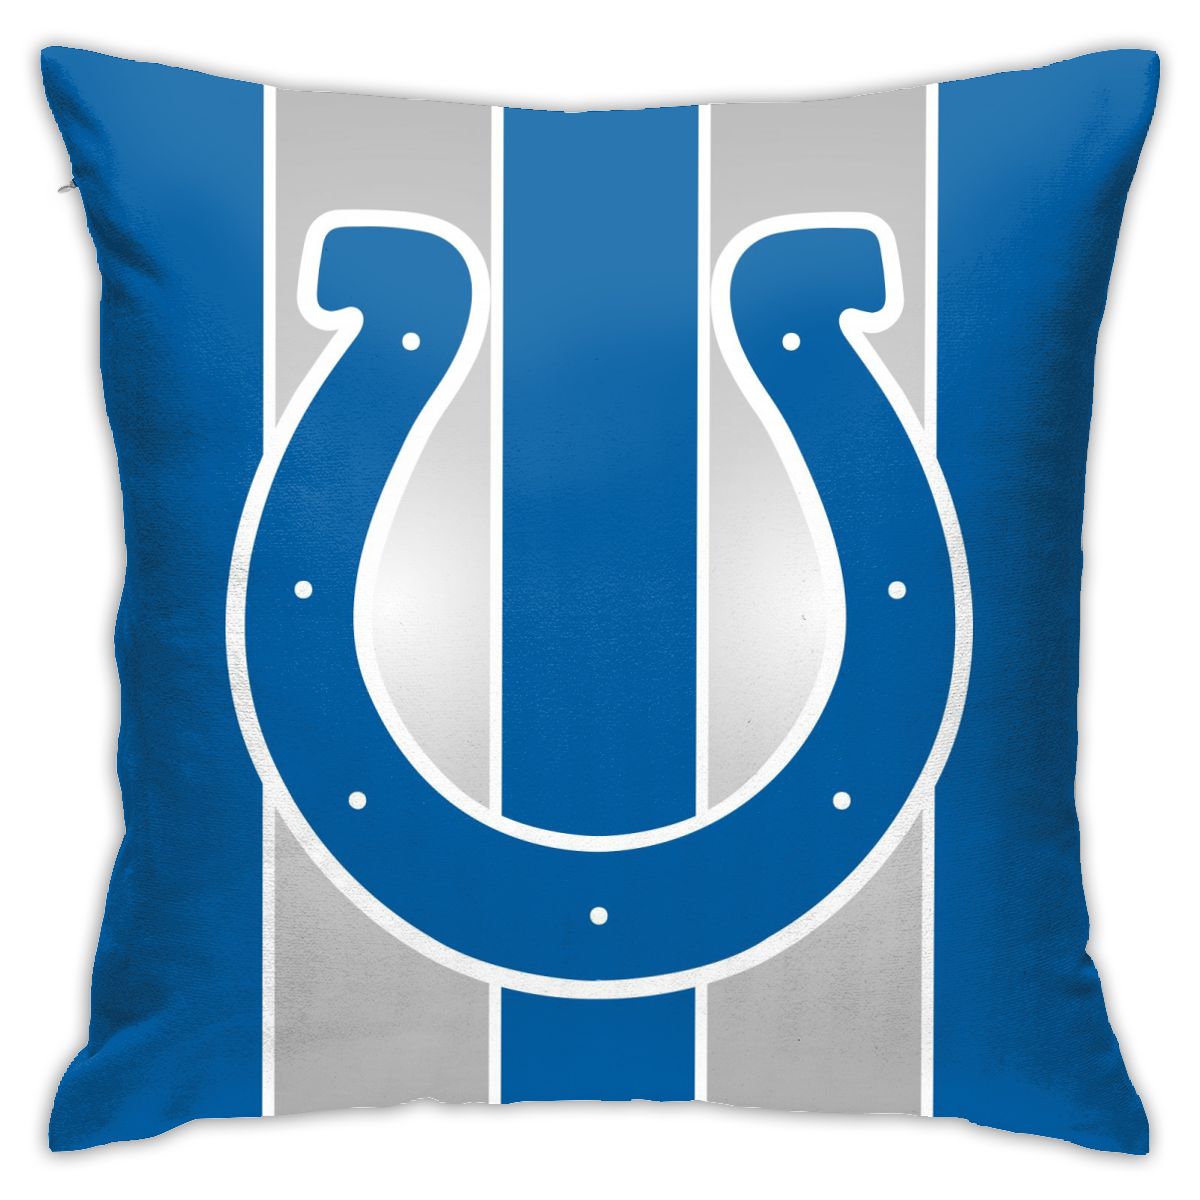 Custom Decorative Pillow 18inch*18inch 01- Royal Pillowcase Personalized Throw Pillow Covers